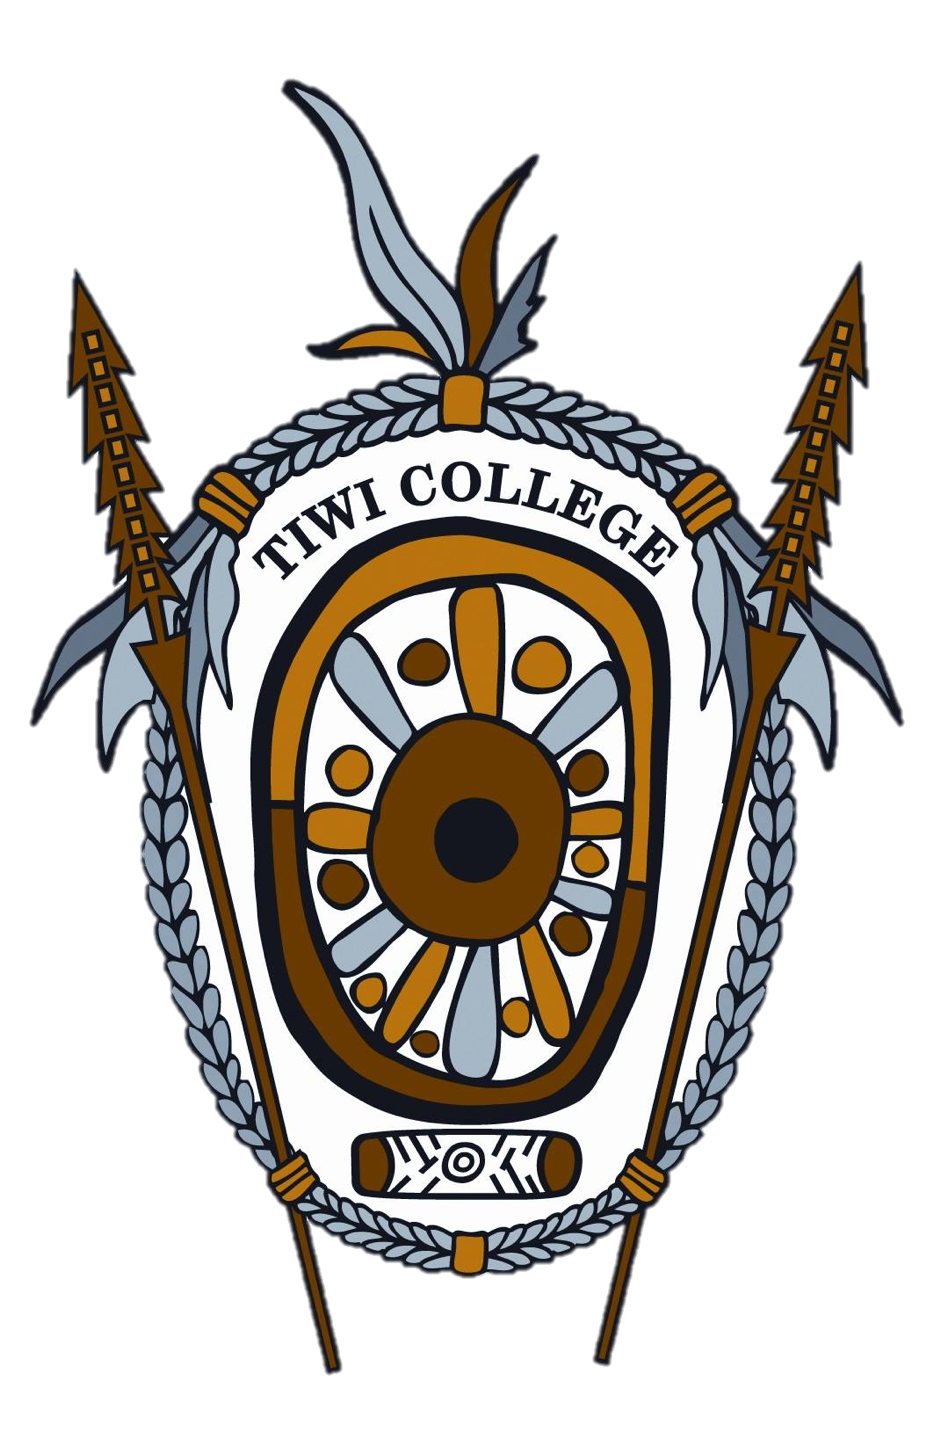 TIWI COLLEGE.png